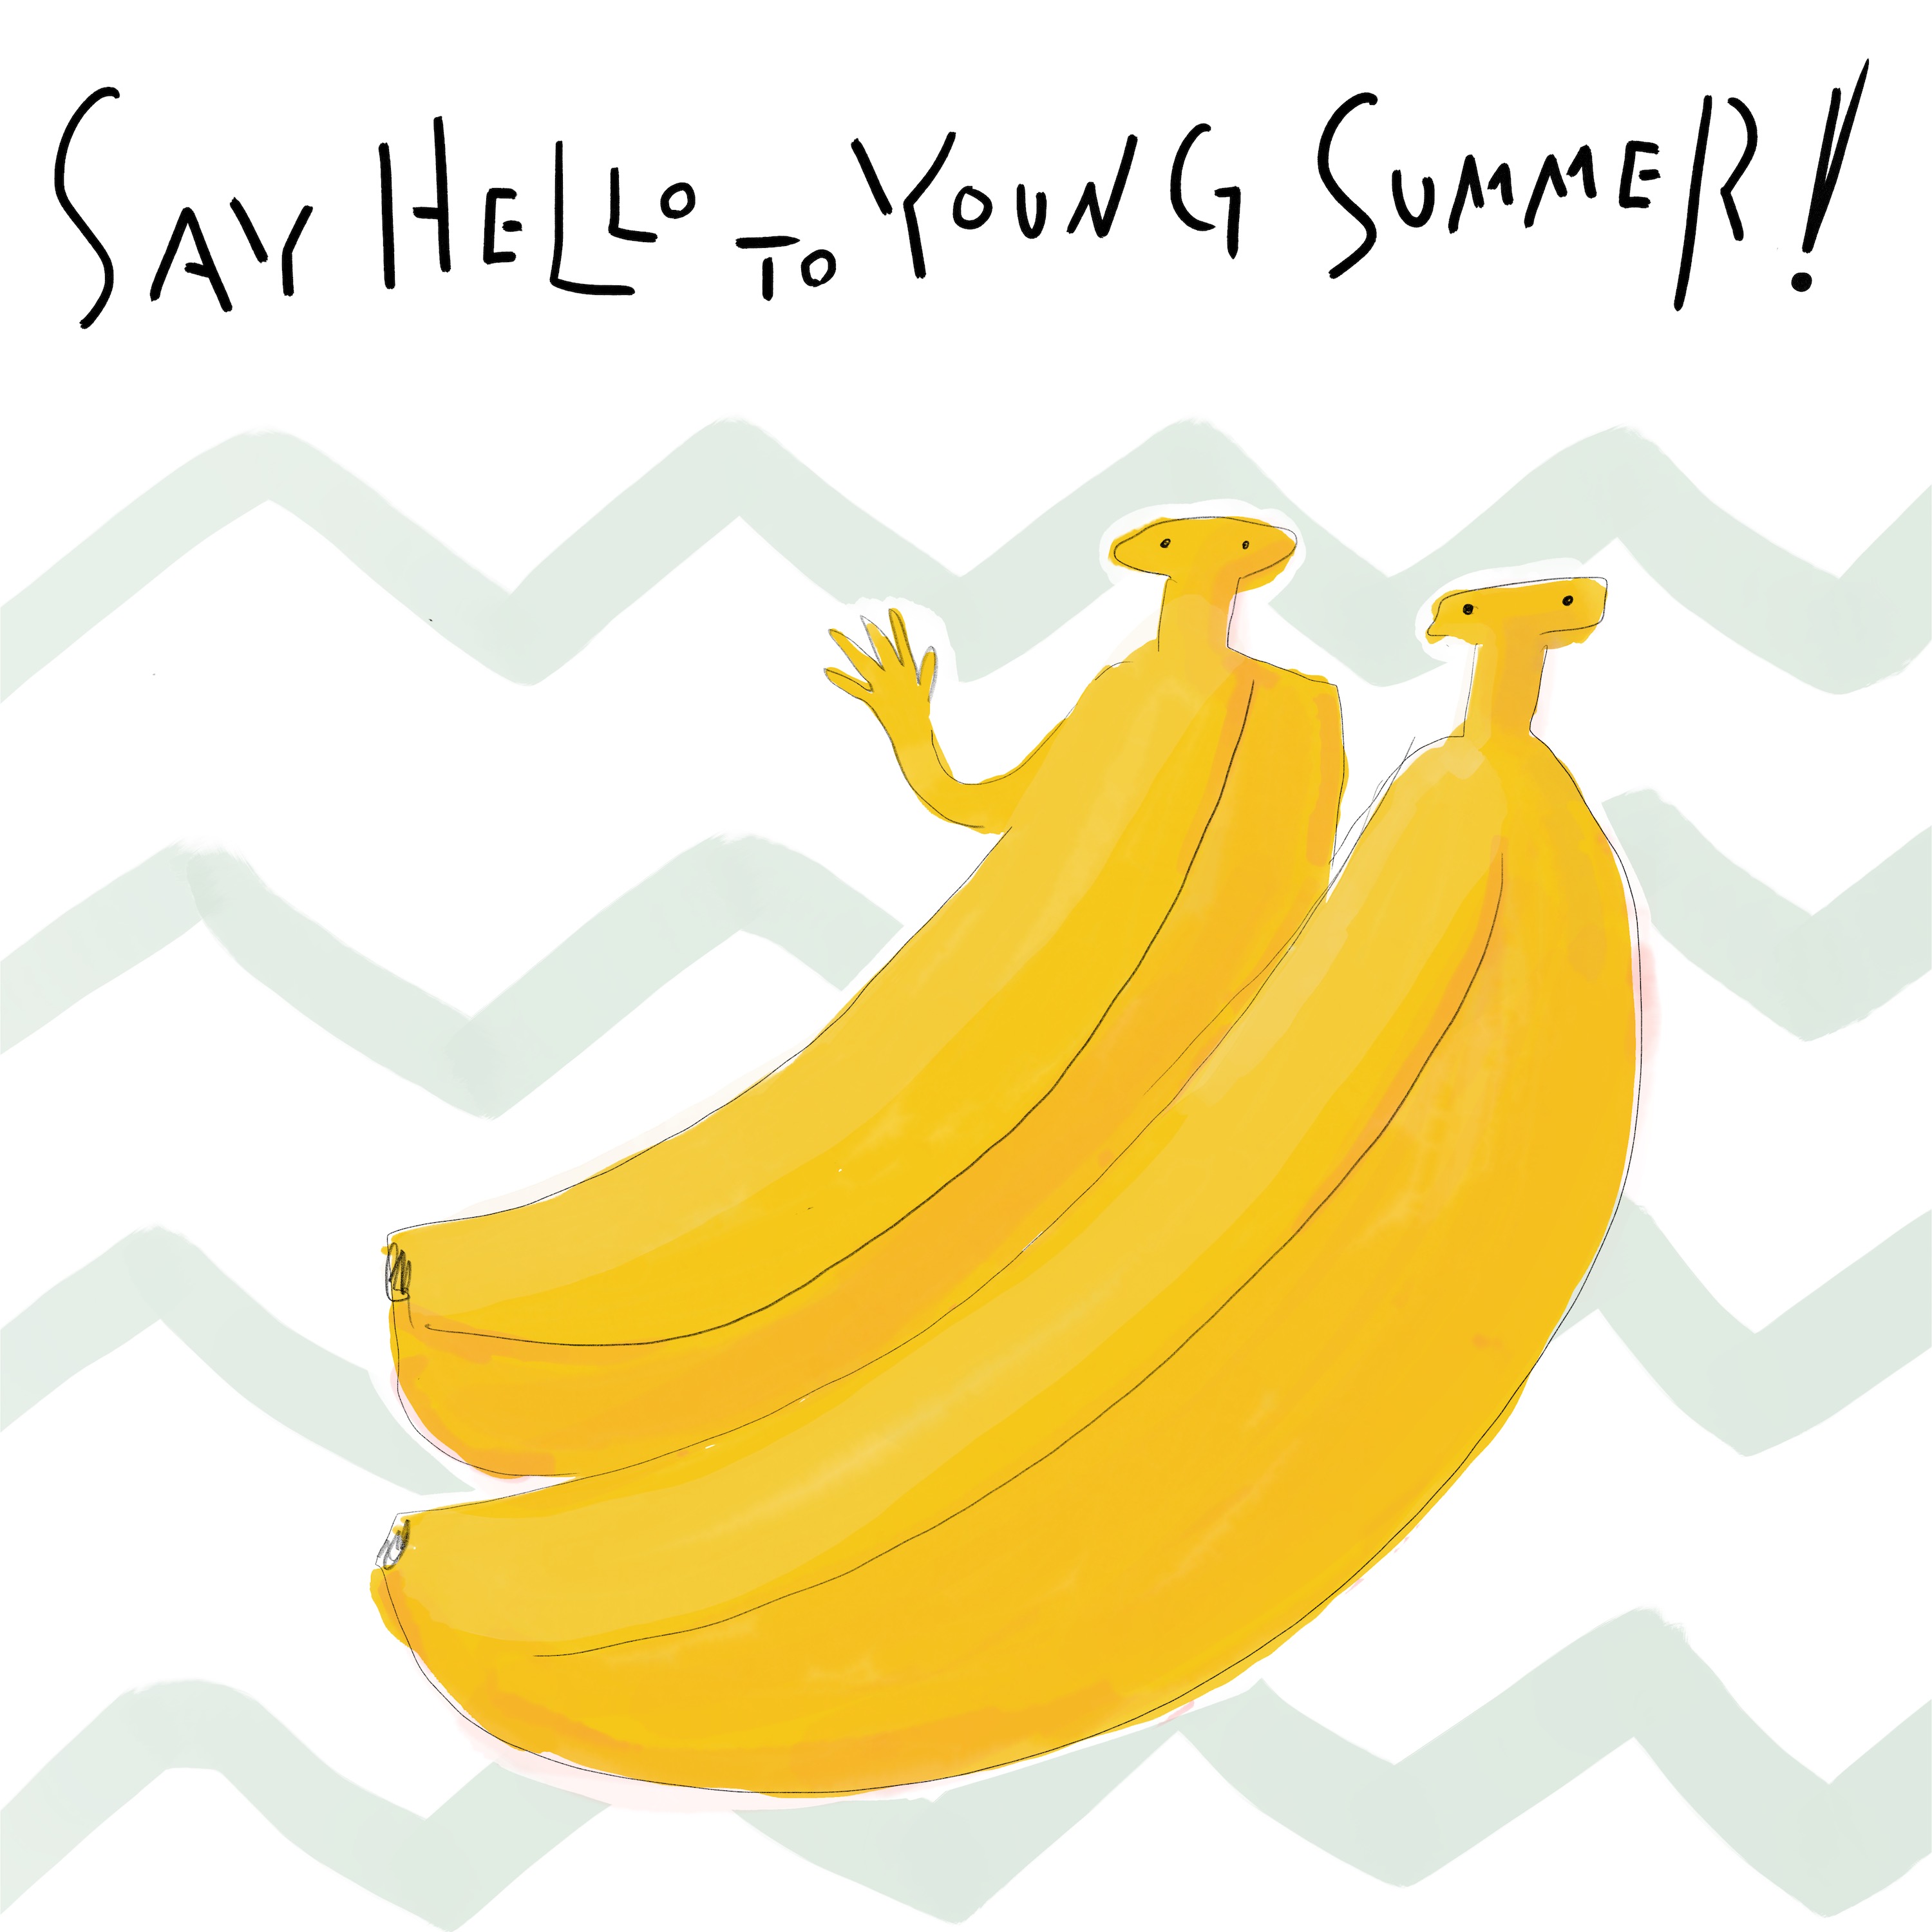 SEY HELLO TO YOUNG SUMMER!